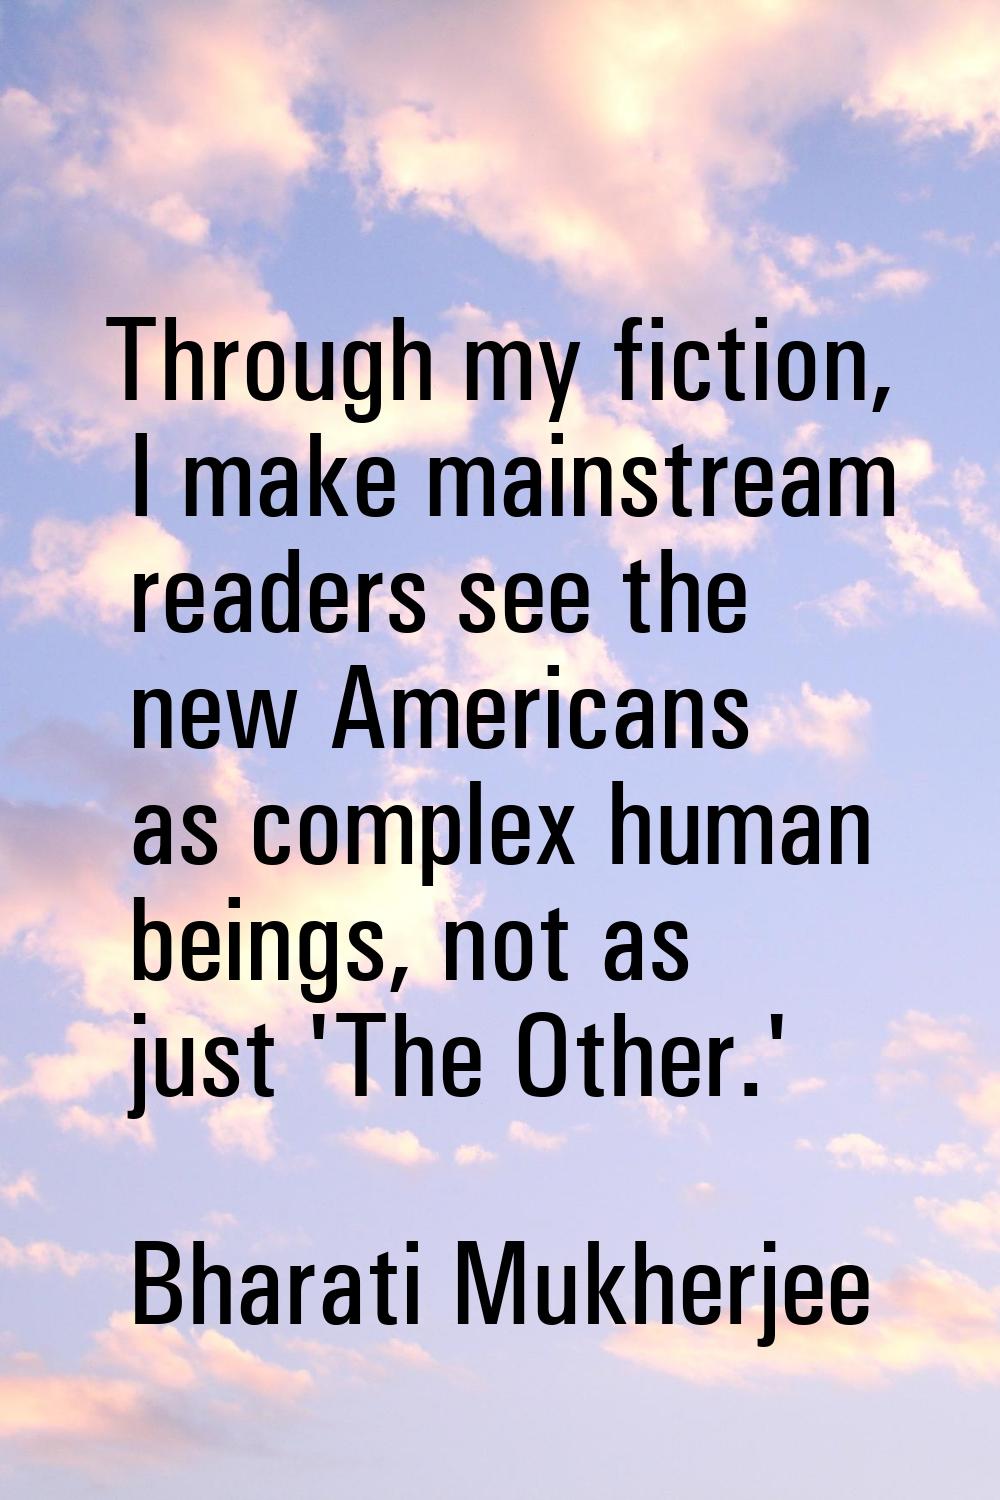 Through my fiction, I make mainstream readers see the new Americans as complex human beings, not as